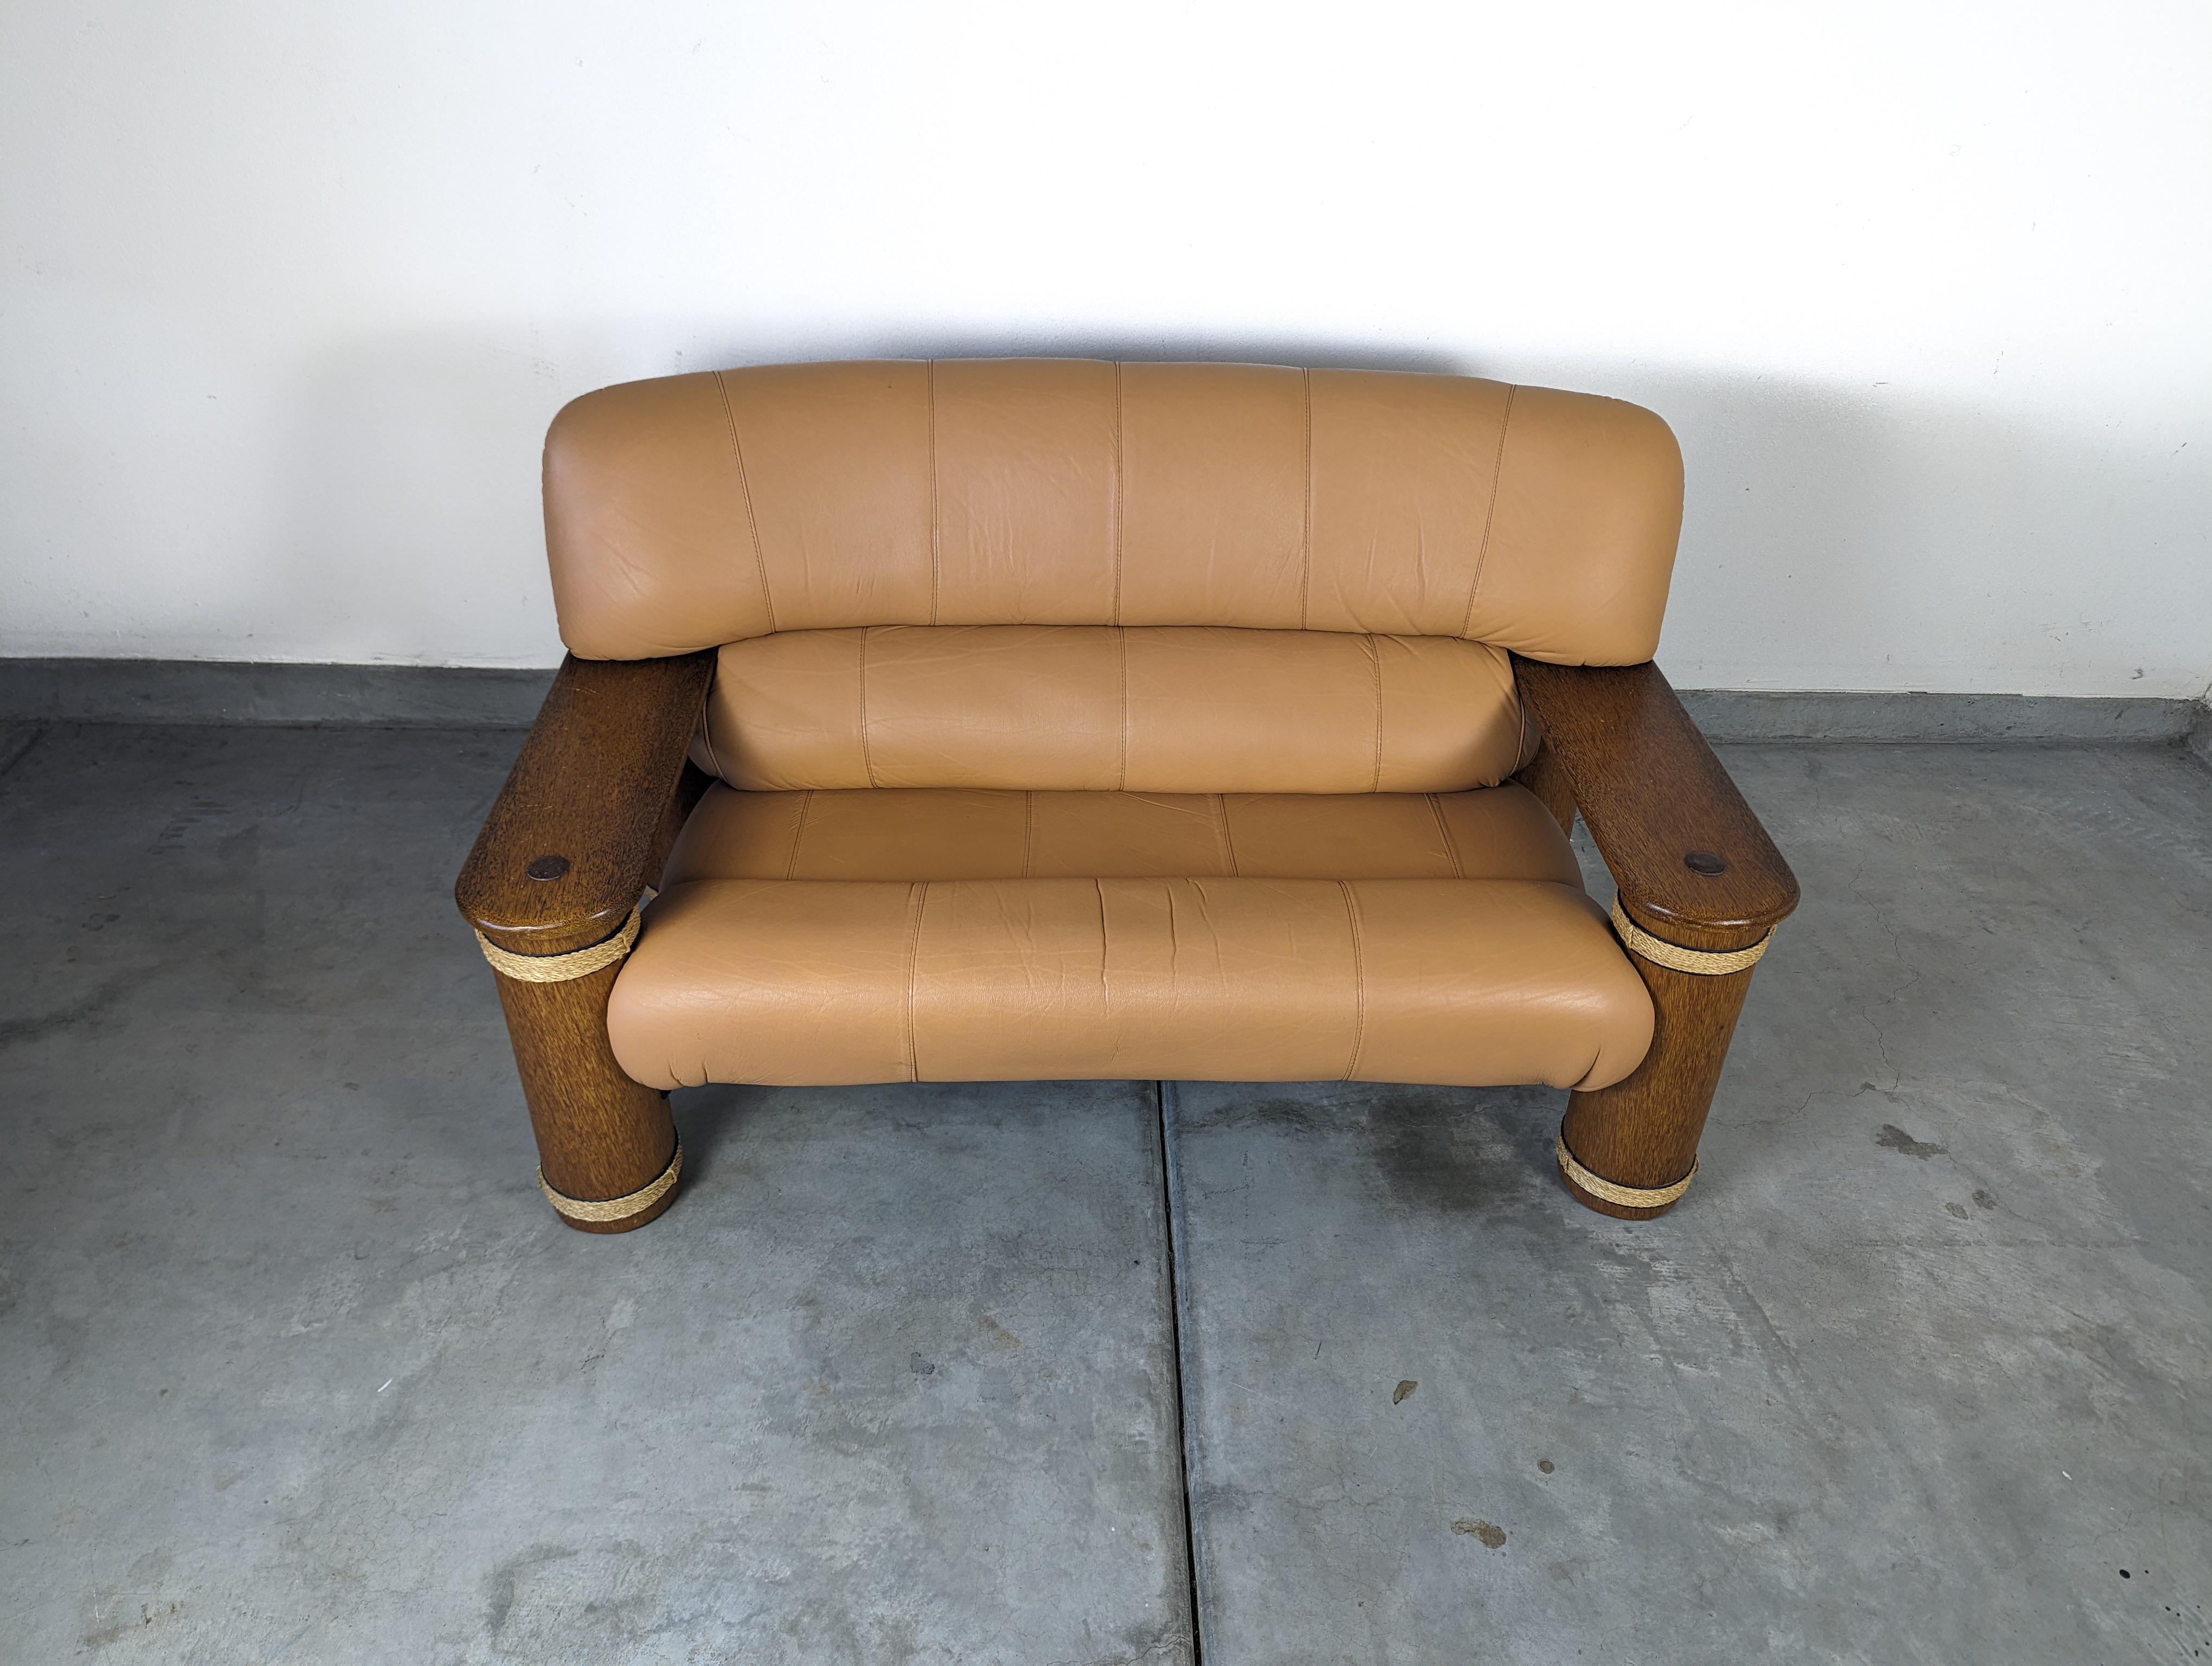 Metal Vintage Leather and Palmwood Loveseat Sofa by Pacific Green, c1990s For Sale